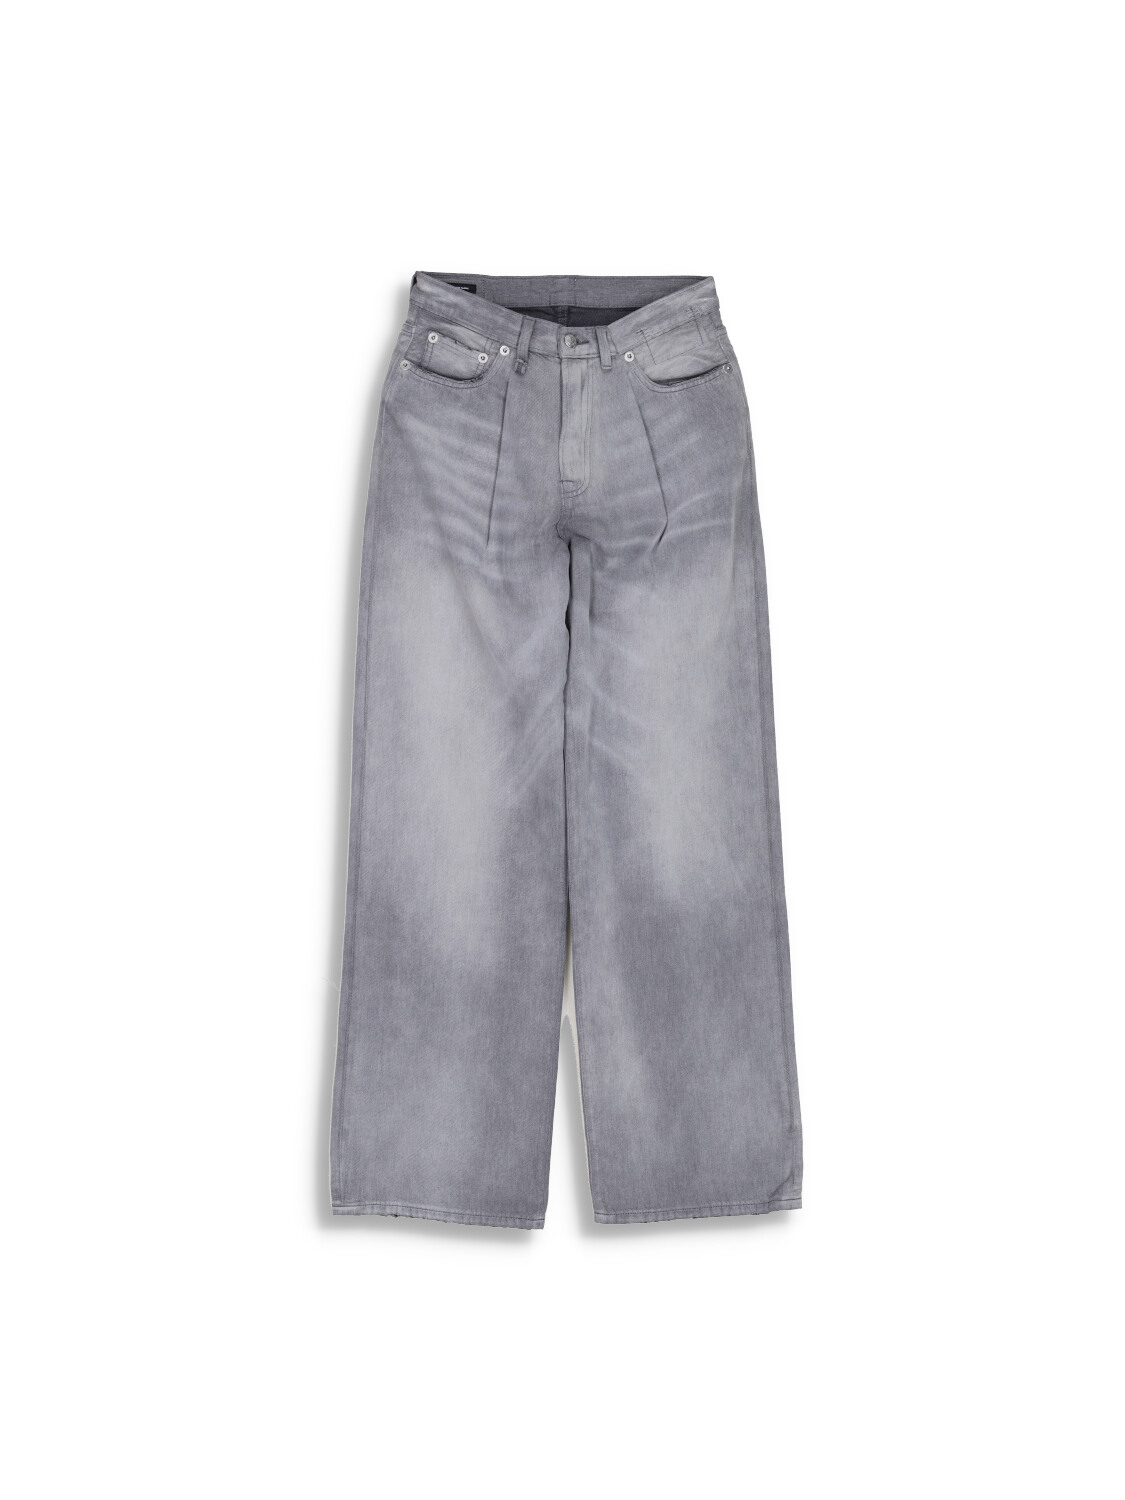 Damon - Jeans trousers with pleat and flared leg